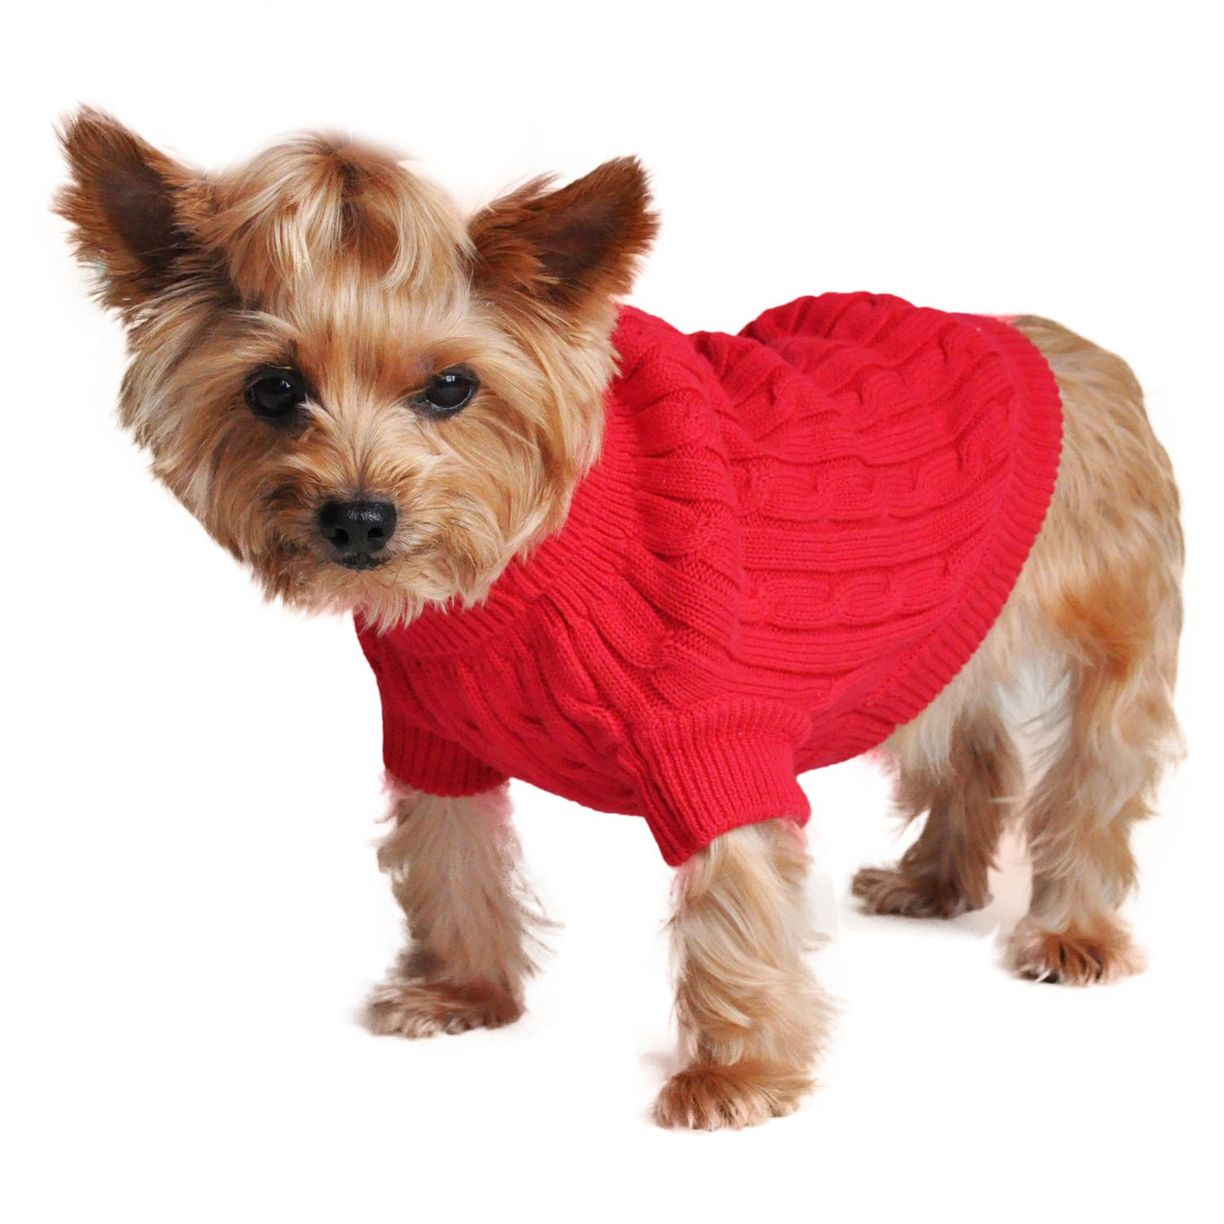 Dog Sweater Knitting Pattern Cotton Cable Knit Dog Sweater Pattern Free Hypoallergenic Dog Sweater